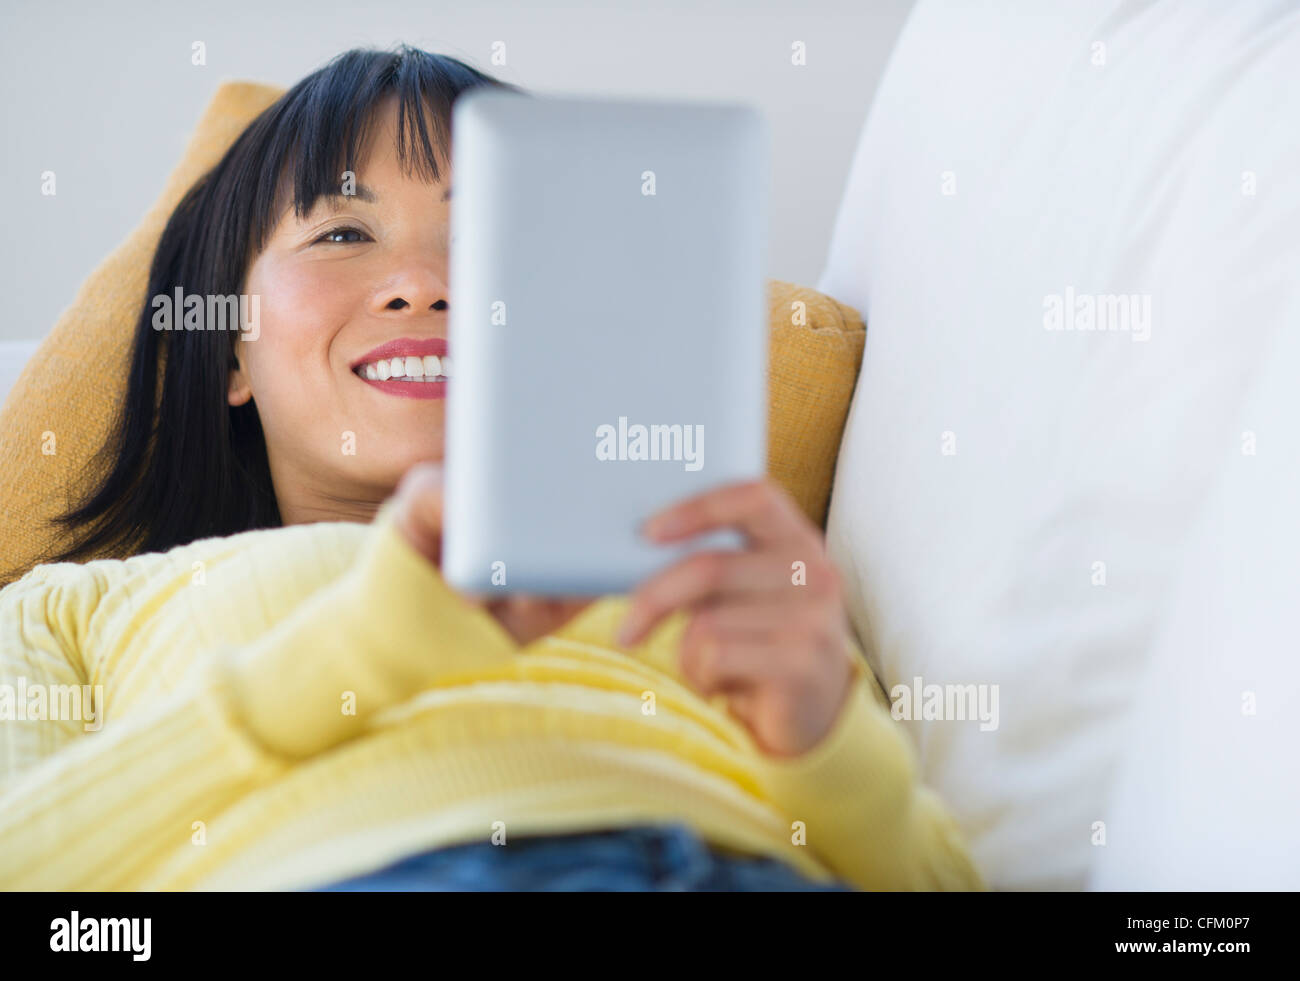 USA, New Jersey, Jersey City, Smiling woman lying on sofa and using digital tablet Banque D'Images